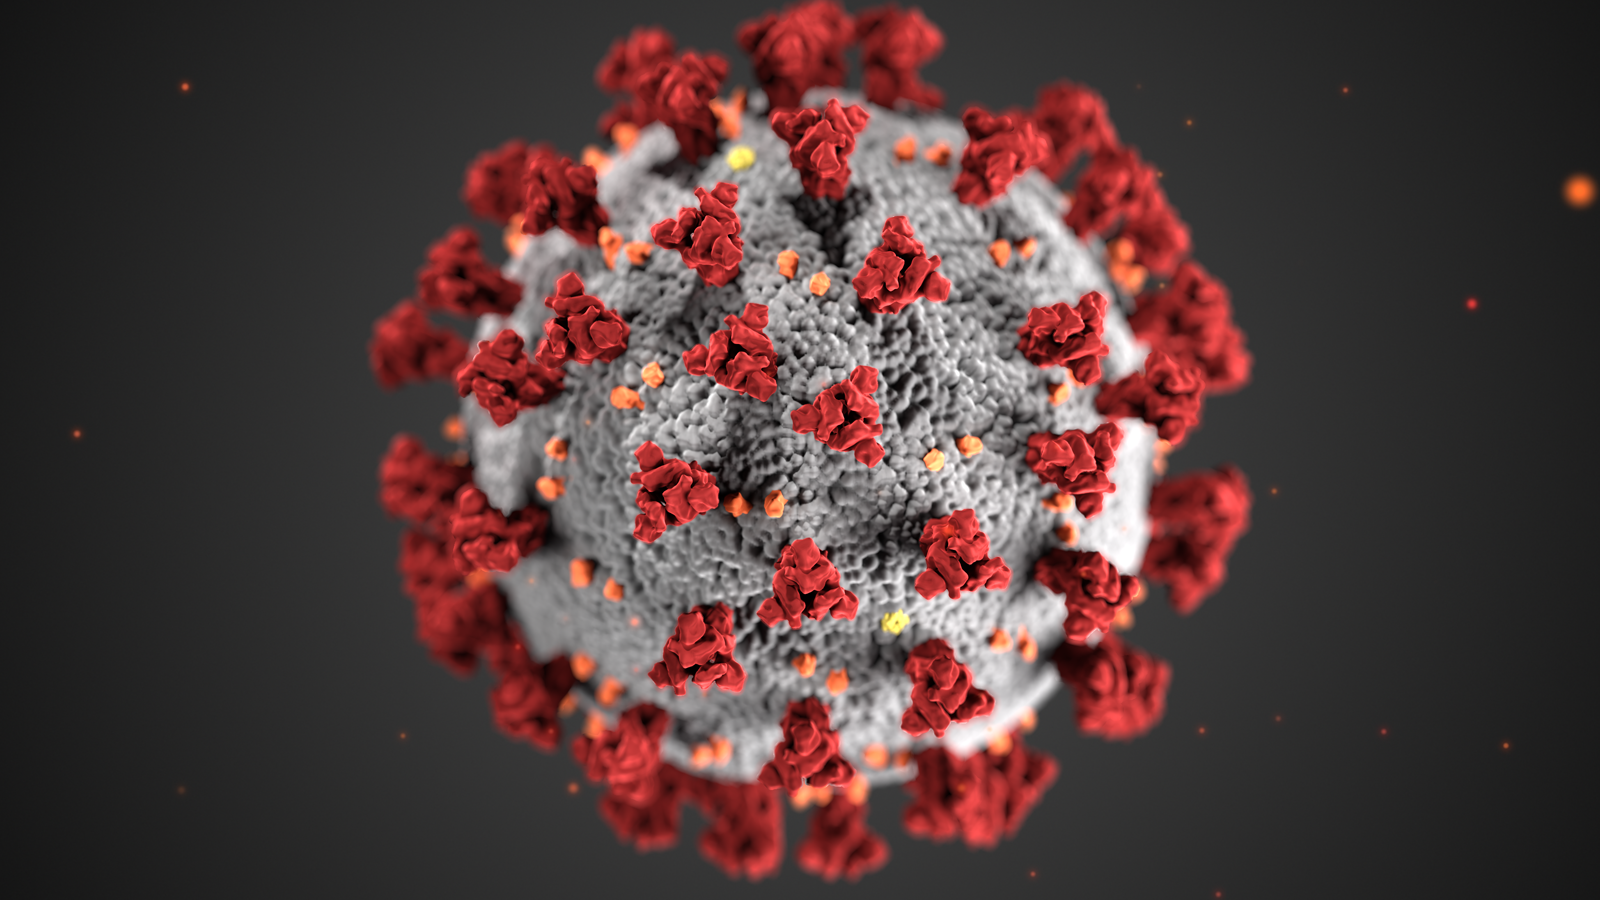 This illustration, created at the Centers for Disease Control and Prevention (CDC), reveals ultrastructural morphology exhibited by coronaviruses. Note the spikes that adorn the outer surface of the virus, which impart the look of a corona surrounding the virion, when viewed electron microscopically. A novel coronavirus, named Severe Acute Respiratory Syndrome Coronavirus 2 (SARS-CoV-2), was identified as the cause of an outbreak of respiratory illness named coronavirus disease 2019 (COVID-19).